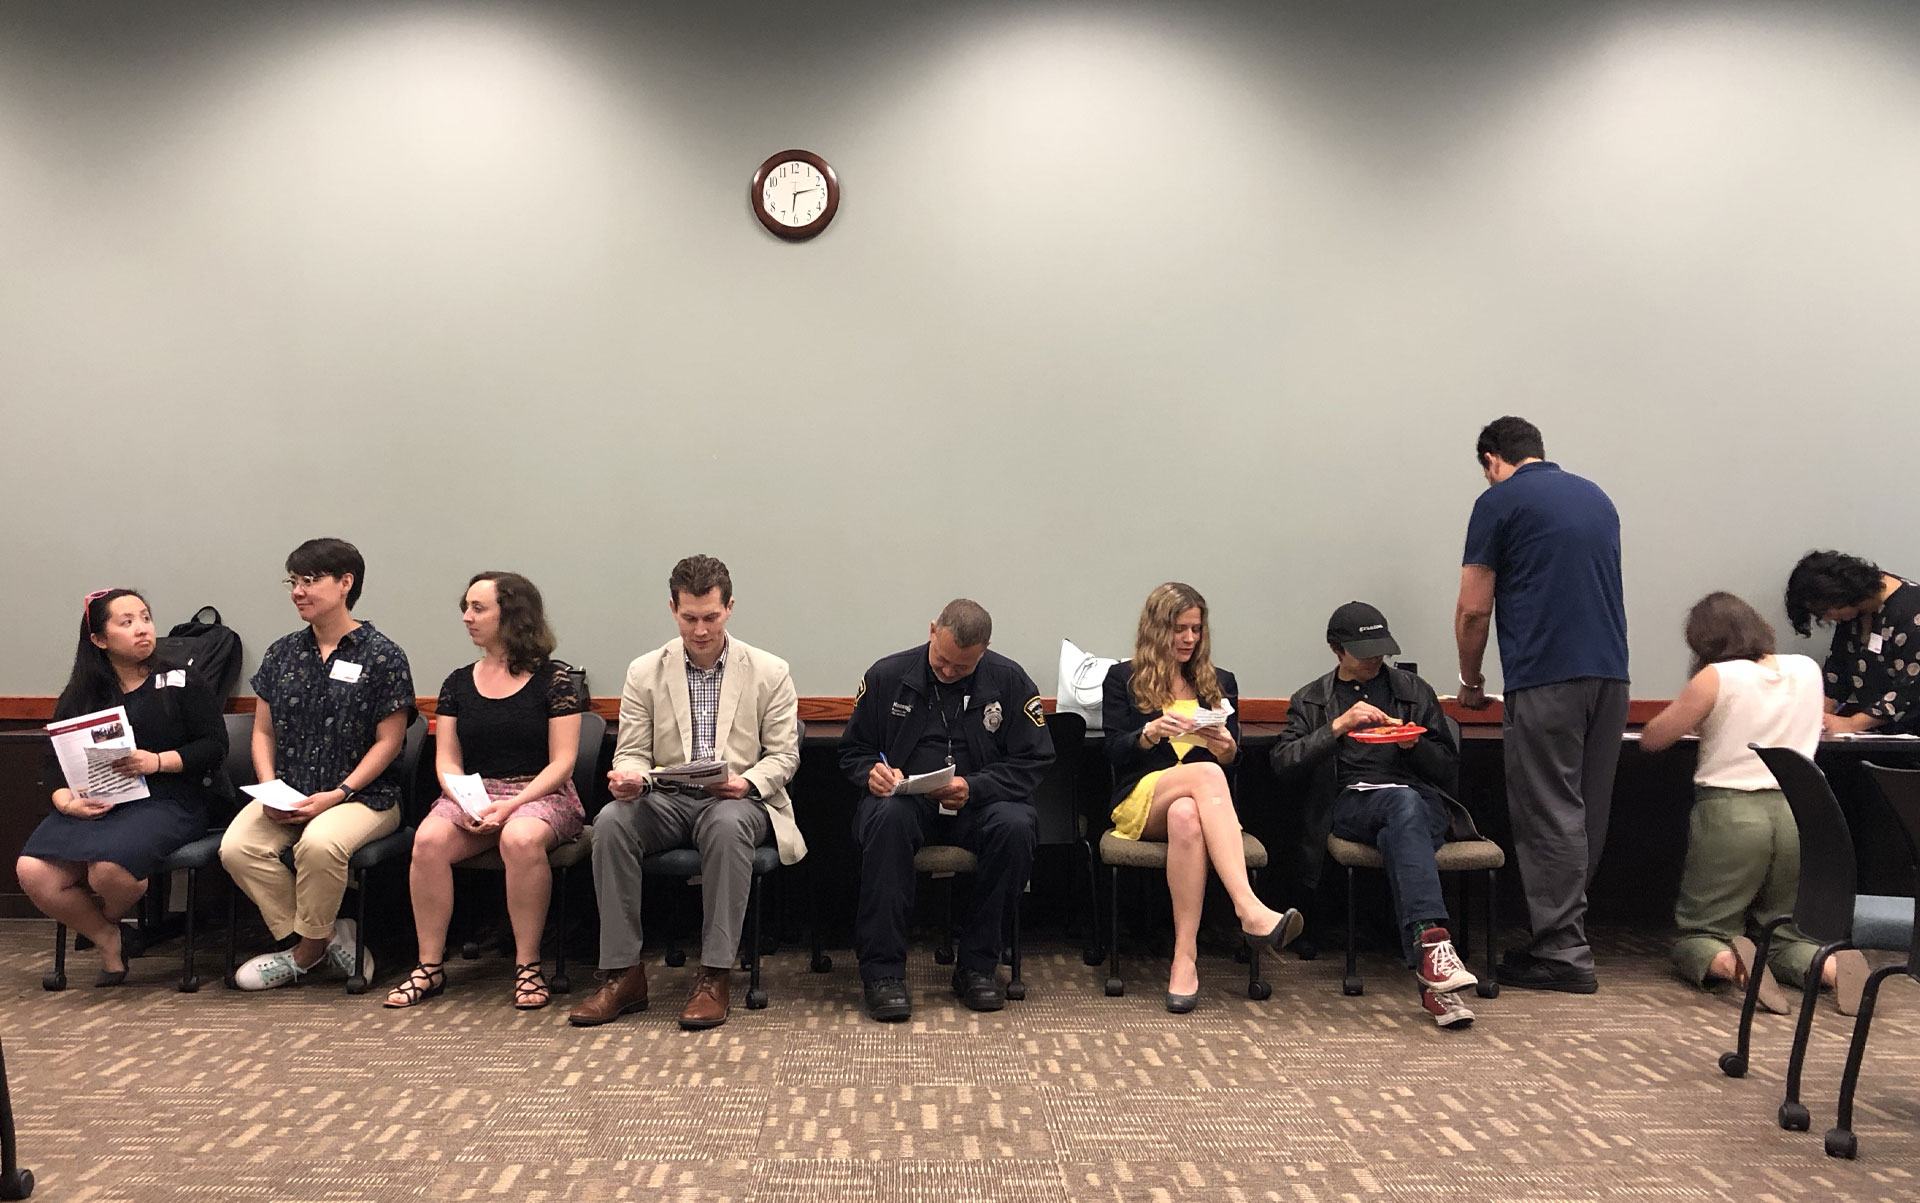 A group of people sitting in a row next to each other.